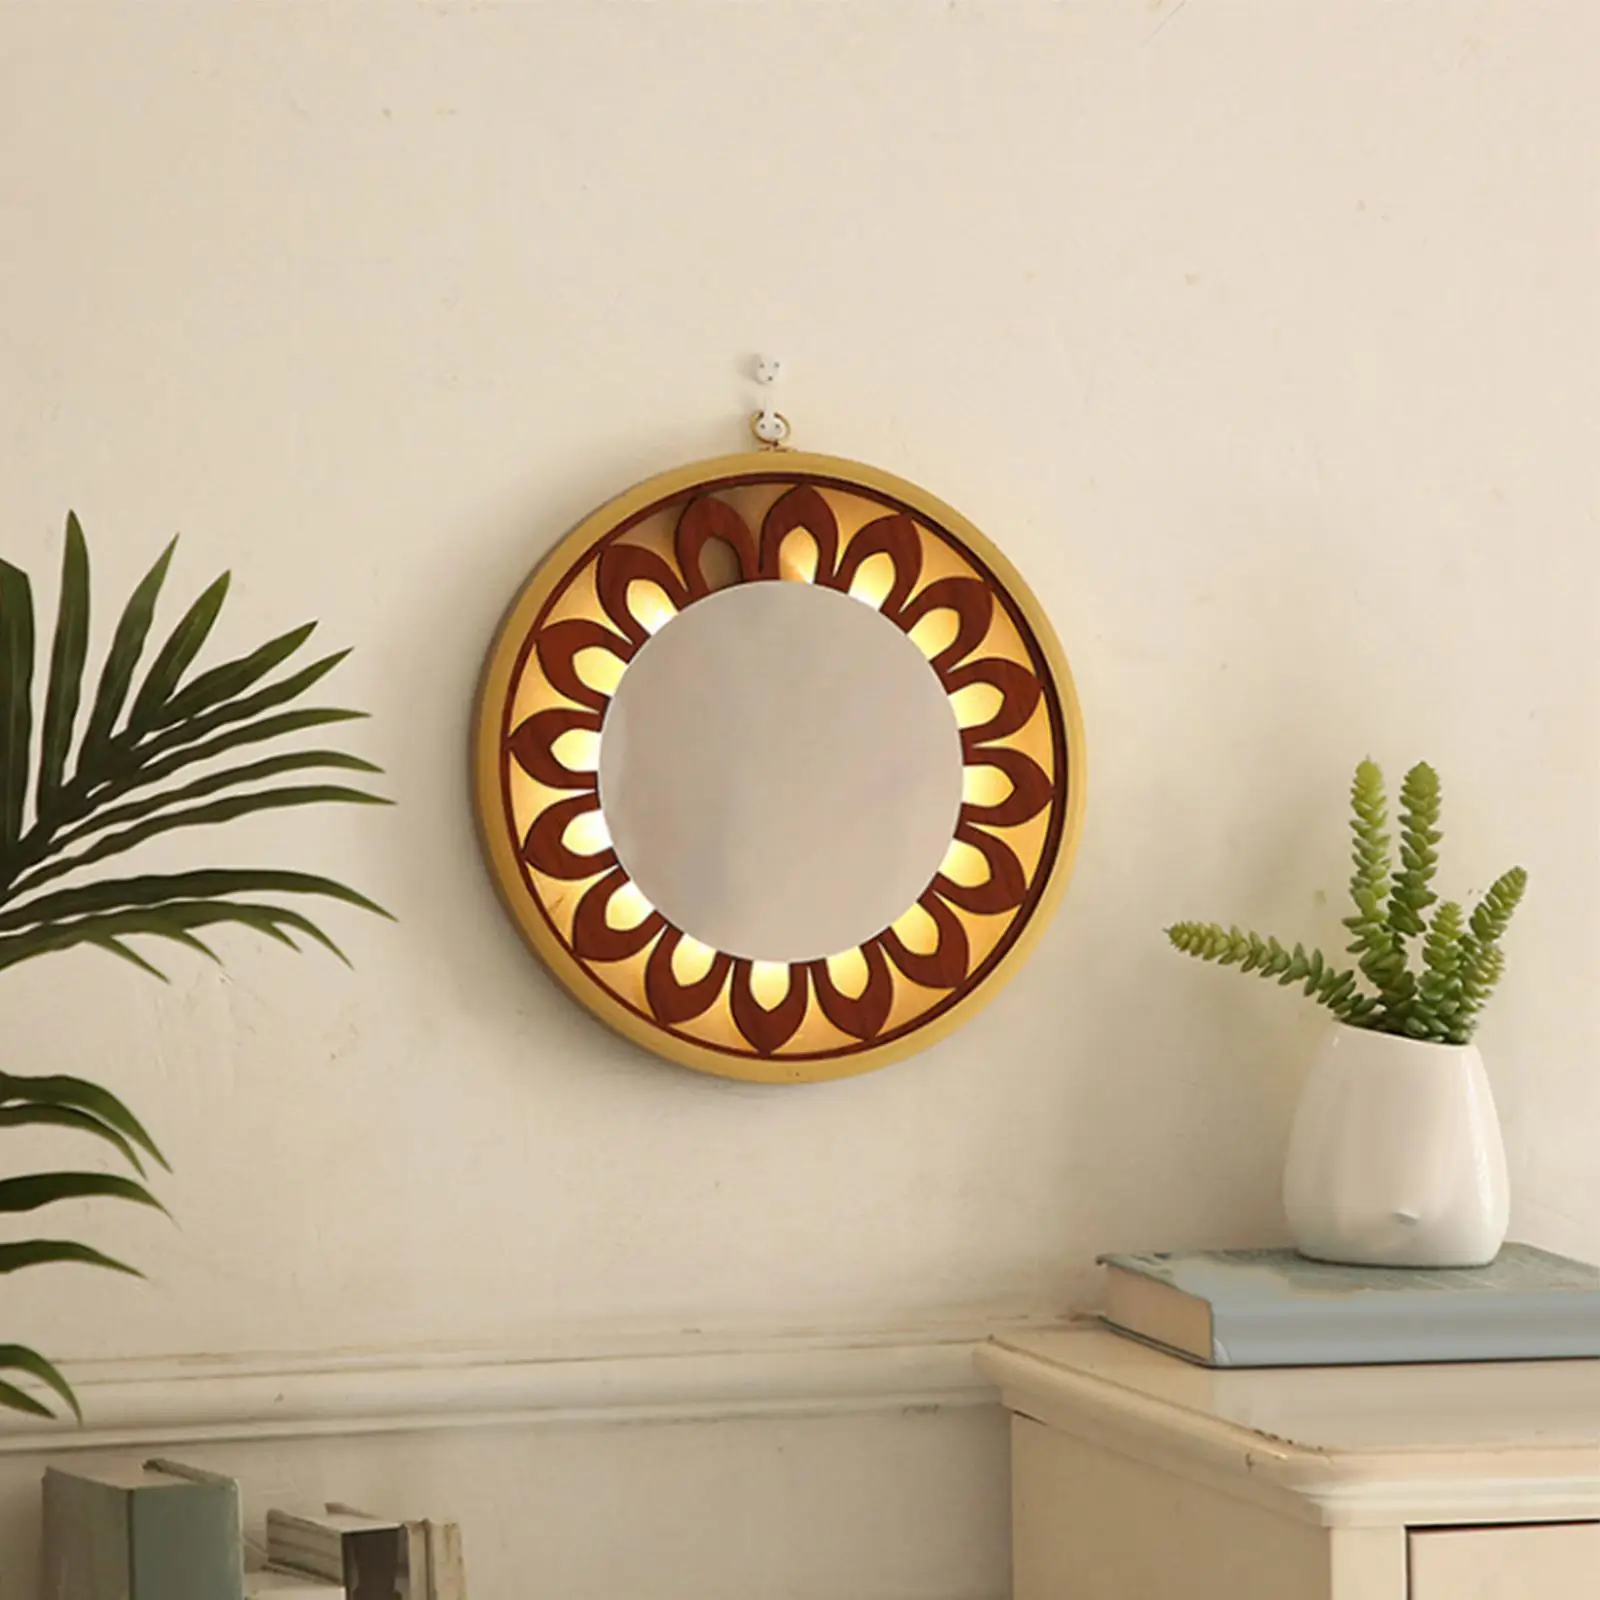 Rustic Wall Hanging Mirror Decorative with Light Circle Mirrors Wood Farmhouse for Hallway Hotel Decor Makeup Hall Wall Decor